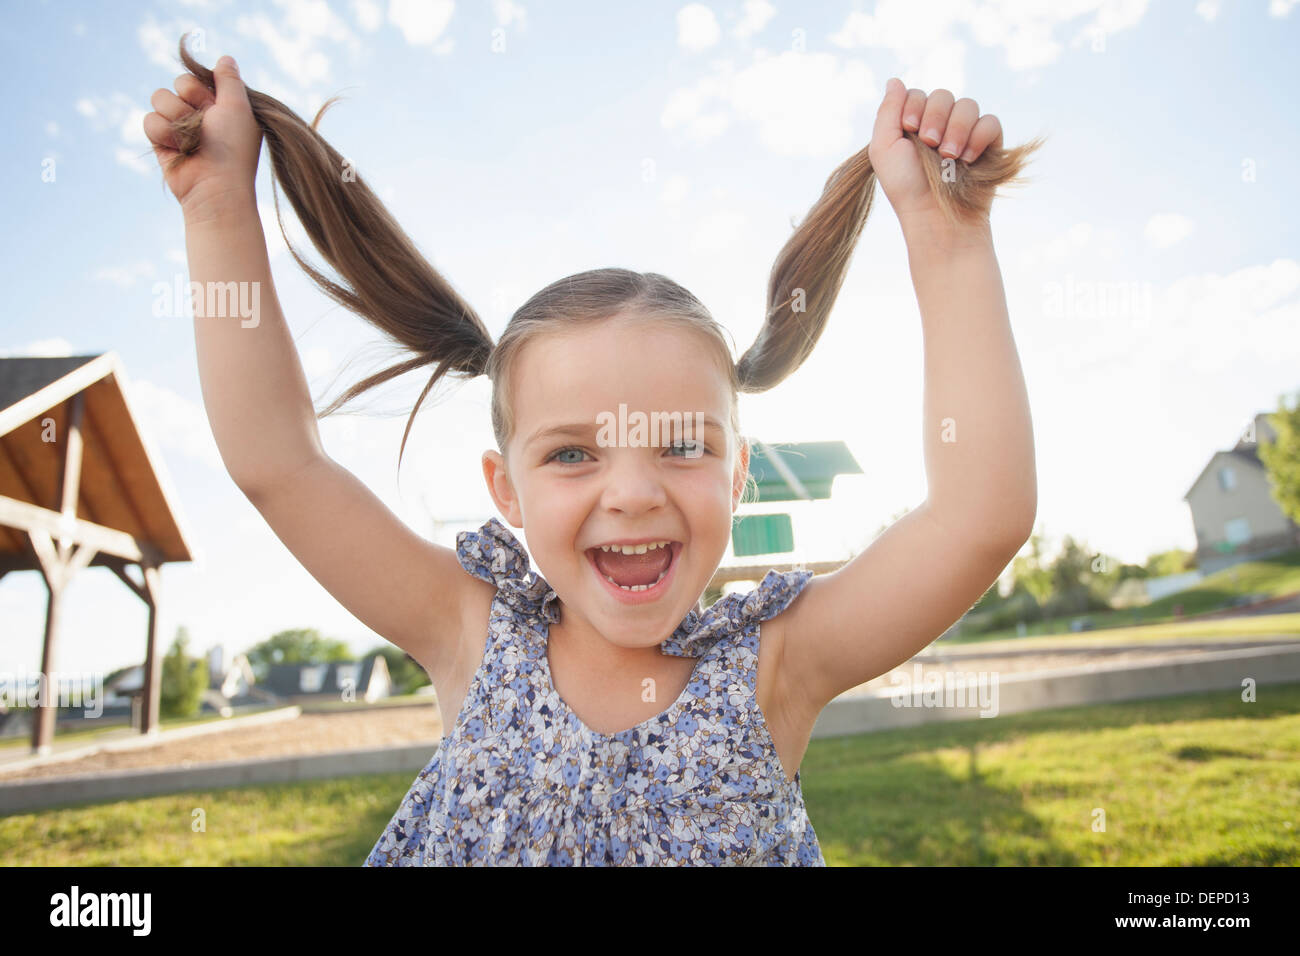 Caucasian girl playing with pigtails outdoors Stock Photo